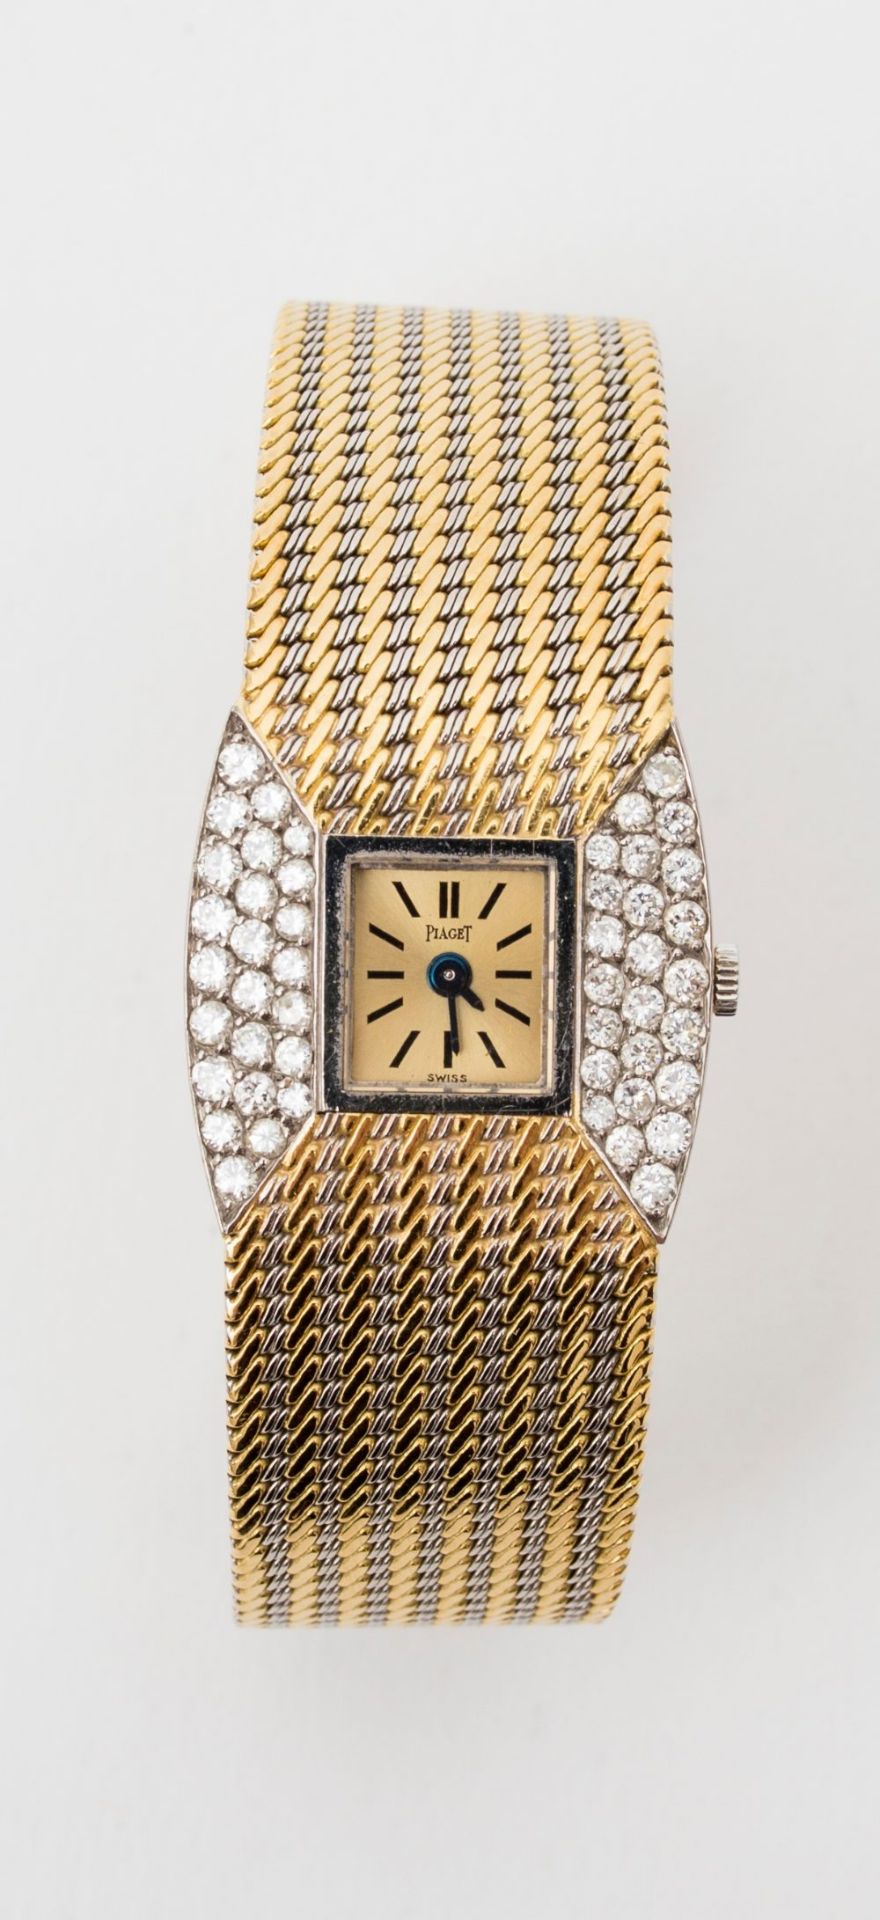 Piaget Lady's watch 18 kt yellow and grey gold with the square gold dial (10x10 mm) set in a - Image 2 of 2